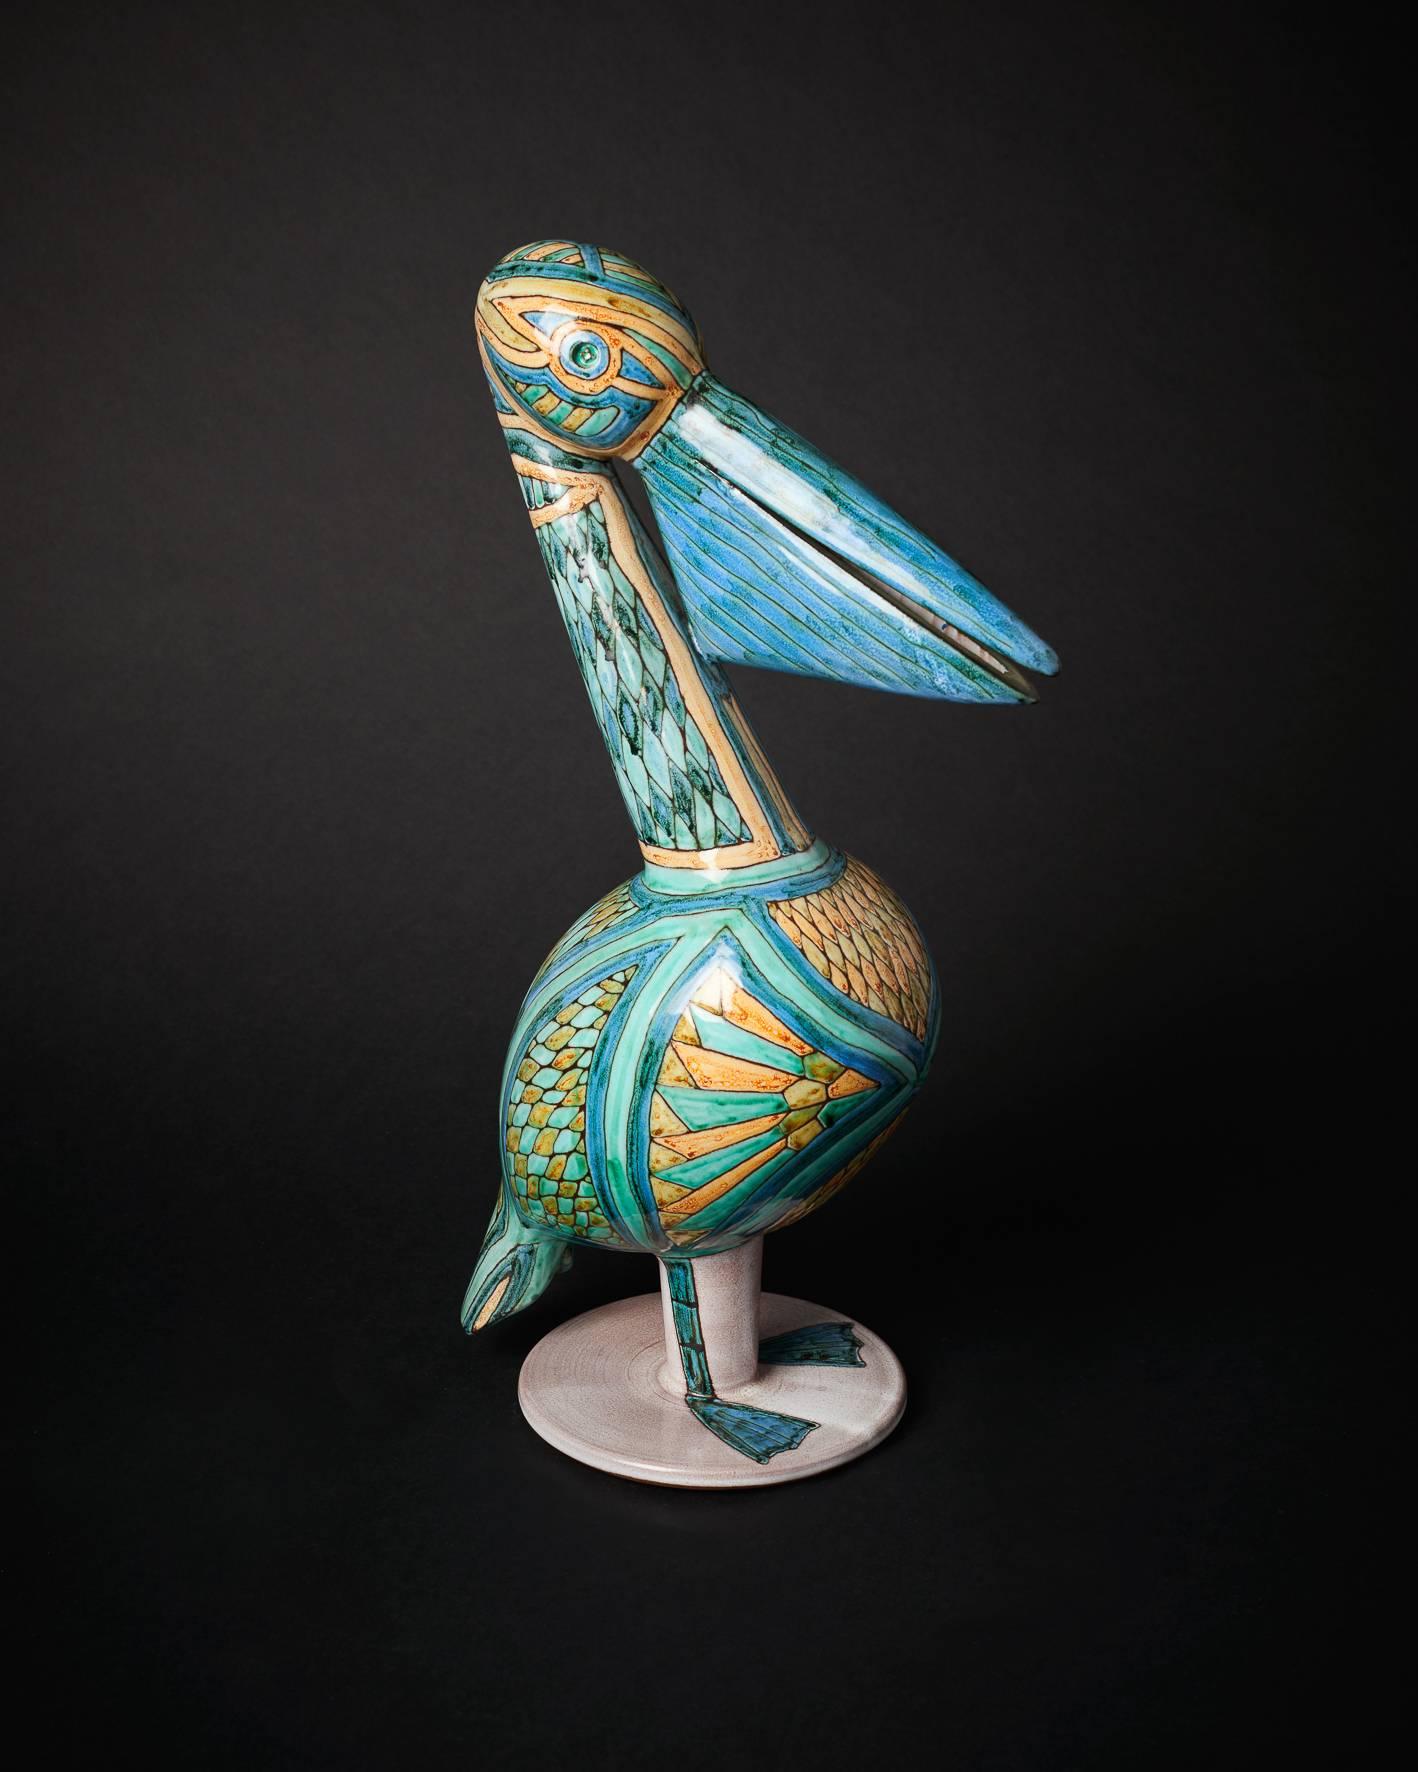 Enameled Pelican Ceramic Sculpture with Cloisonné Enamel, French, 1960